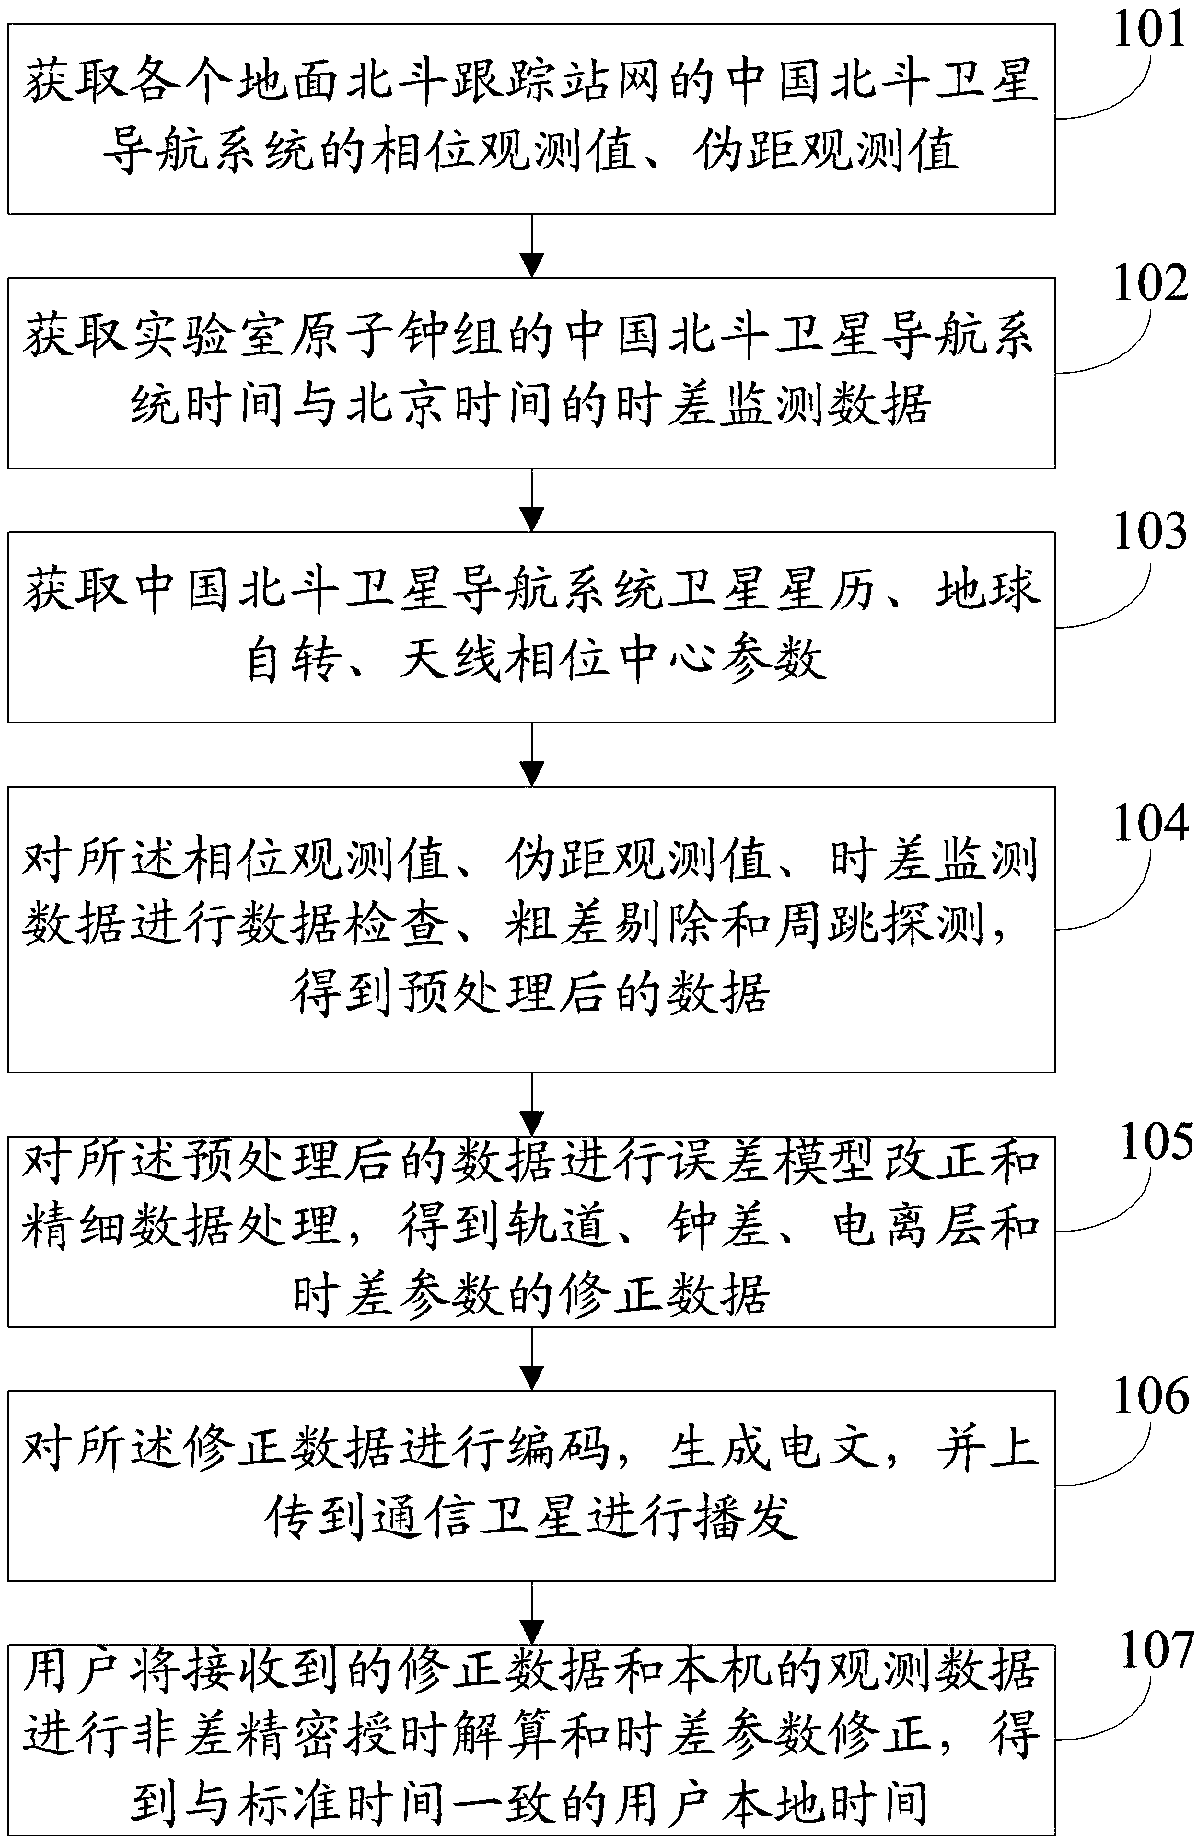 Beidou wide area timing system and method